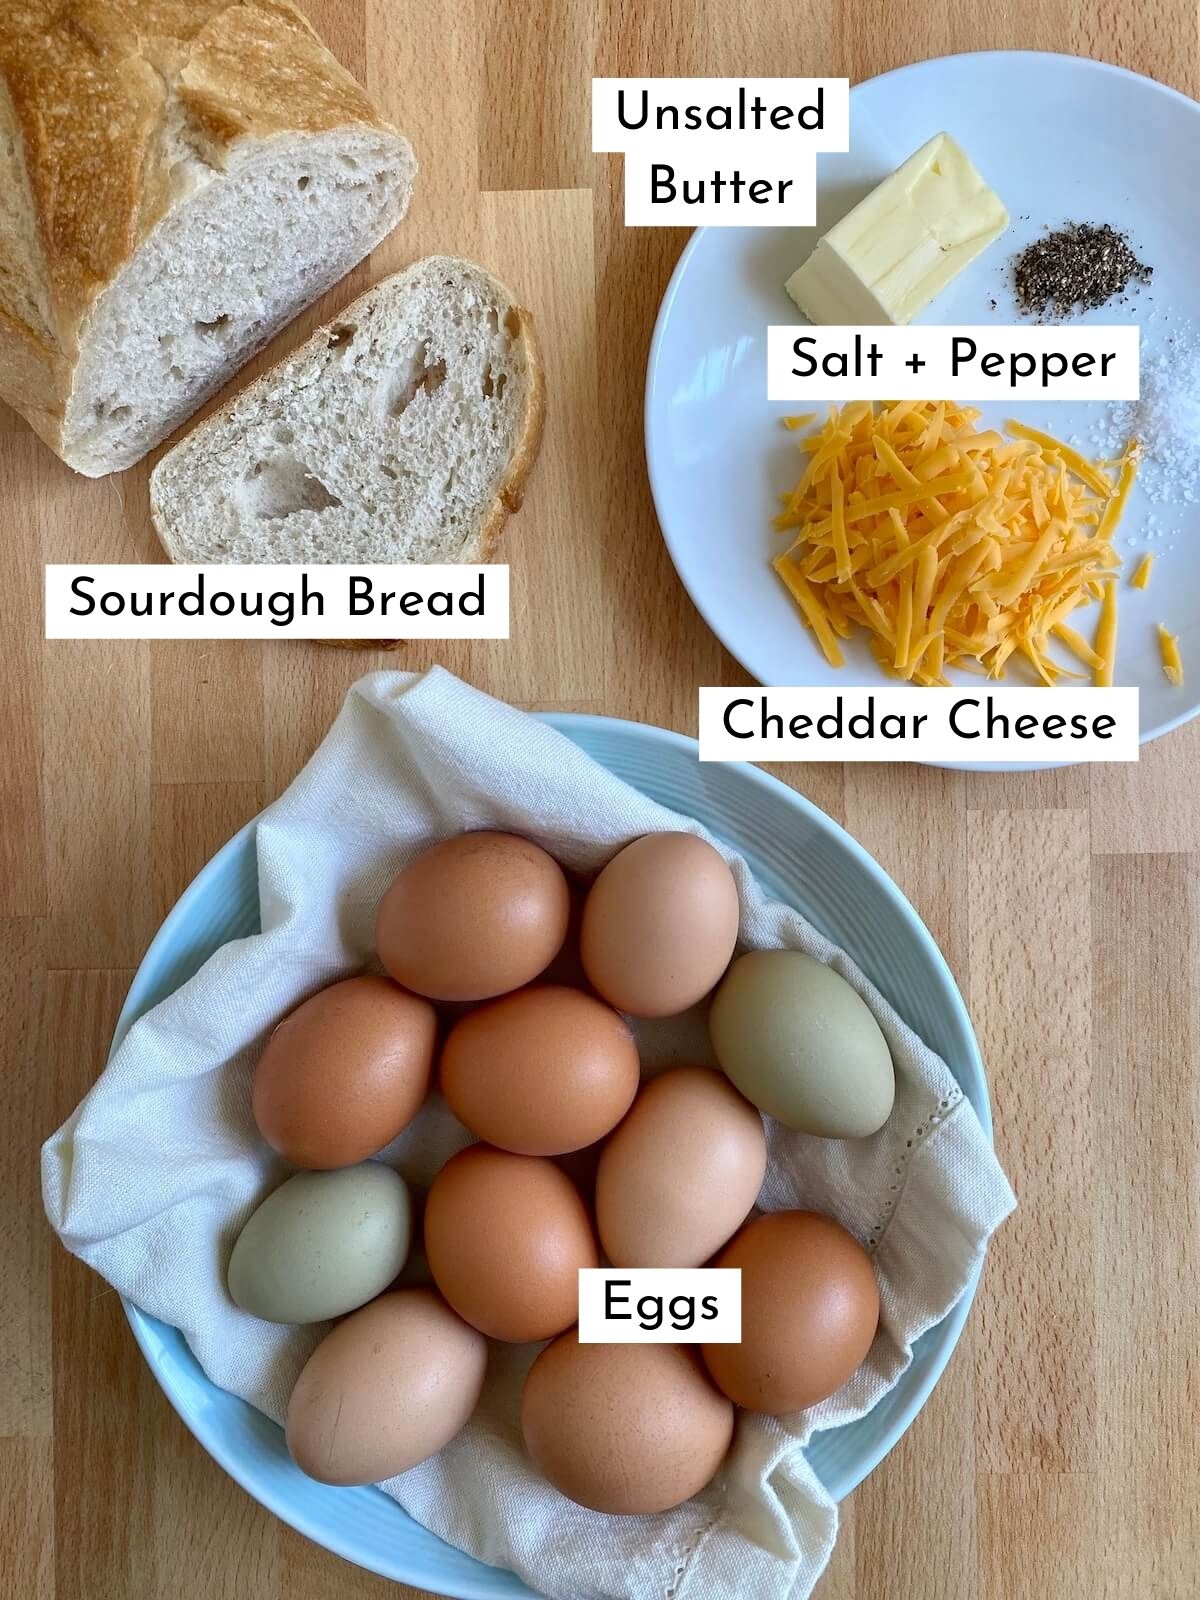 The ingredients to make scrambled eggs on toast on a butcher block countertop. There is text over each ingredient, stating what it is. The ingredients include sourdough bread, unsalted butter, eggs, cheddar cheese, salt, and pepper.